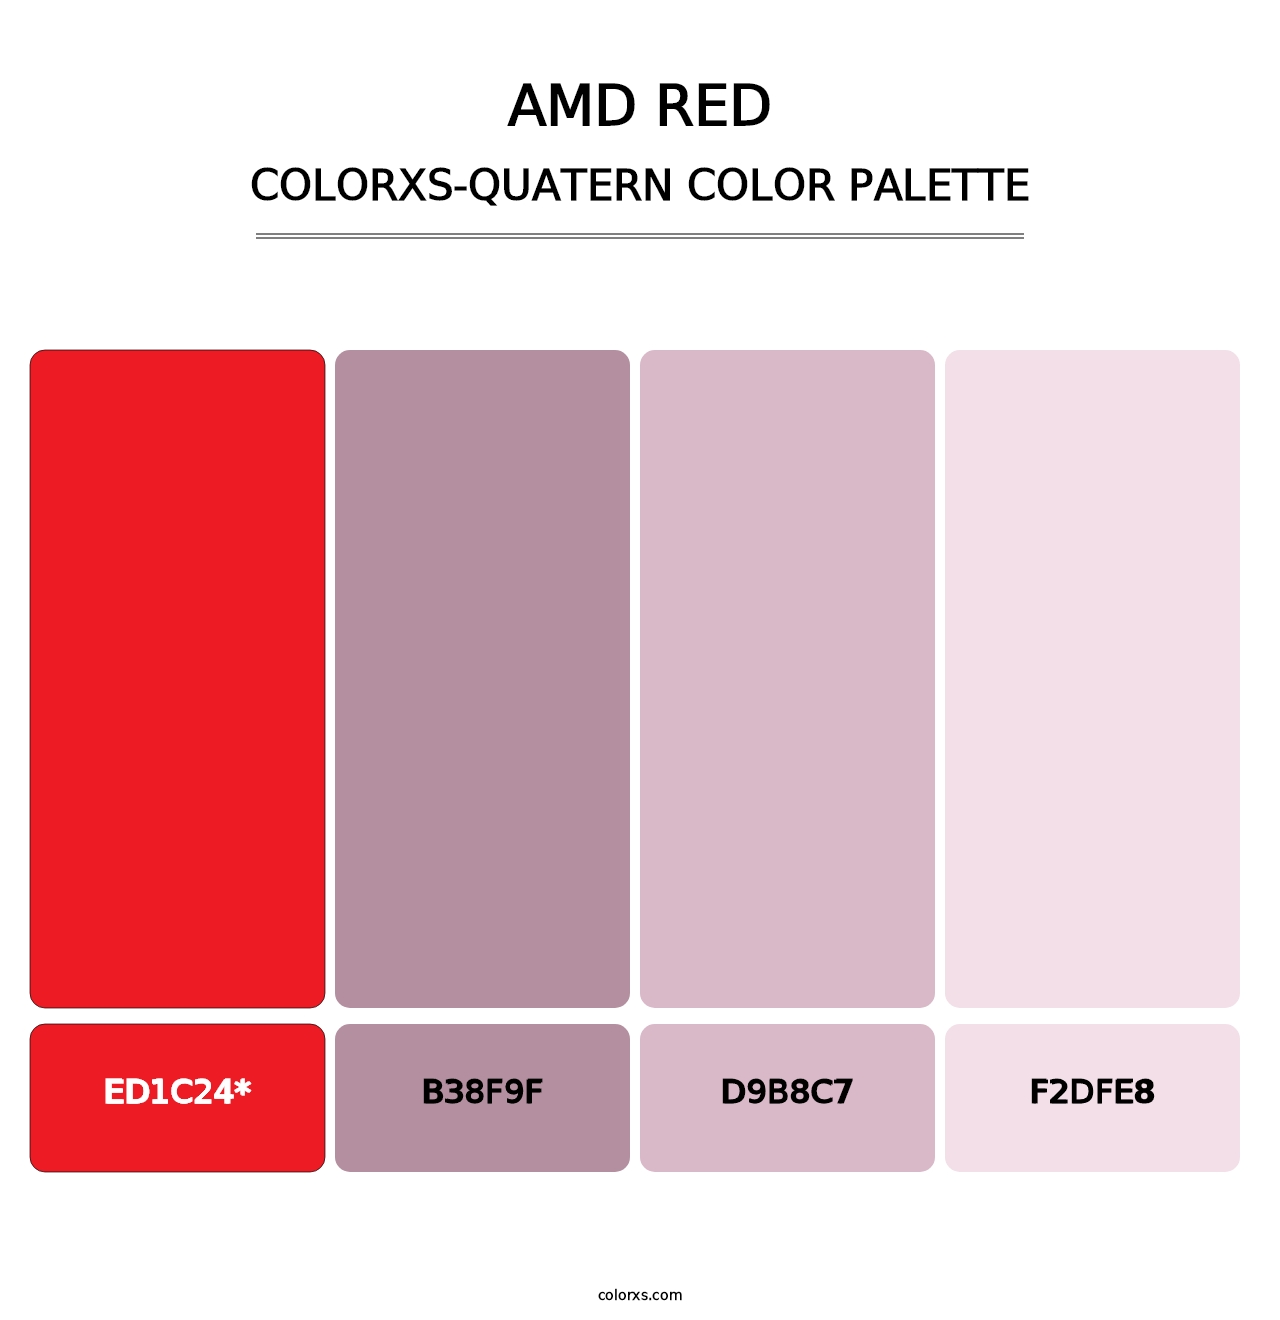 AMD Red - Colorxs Quatern Palette